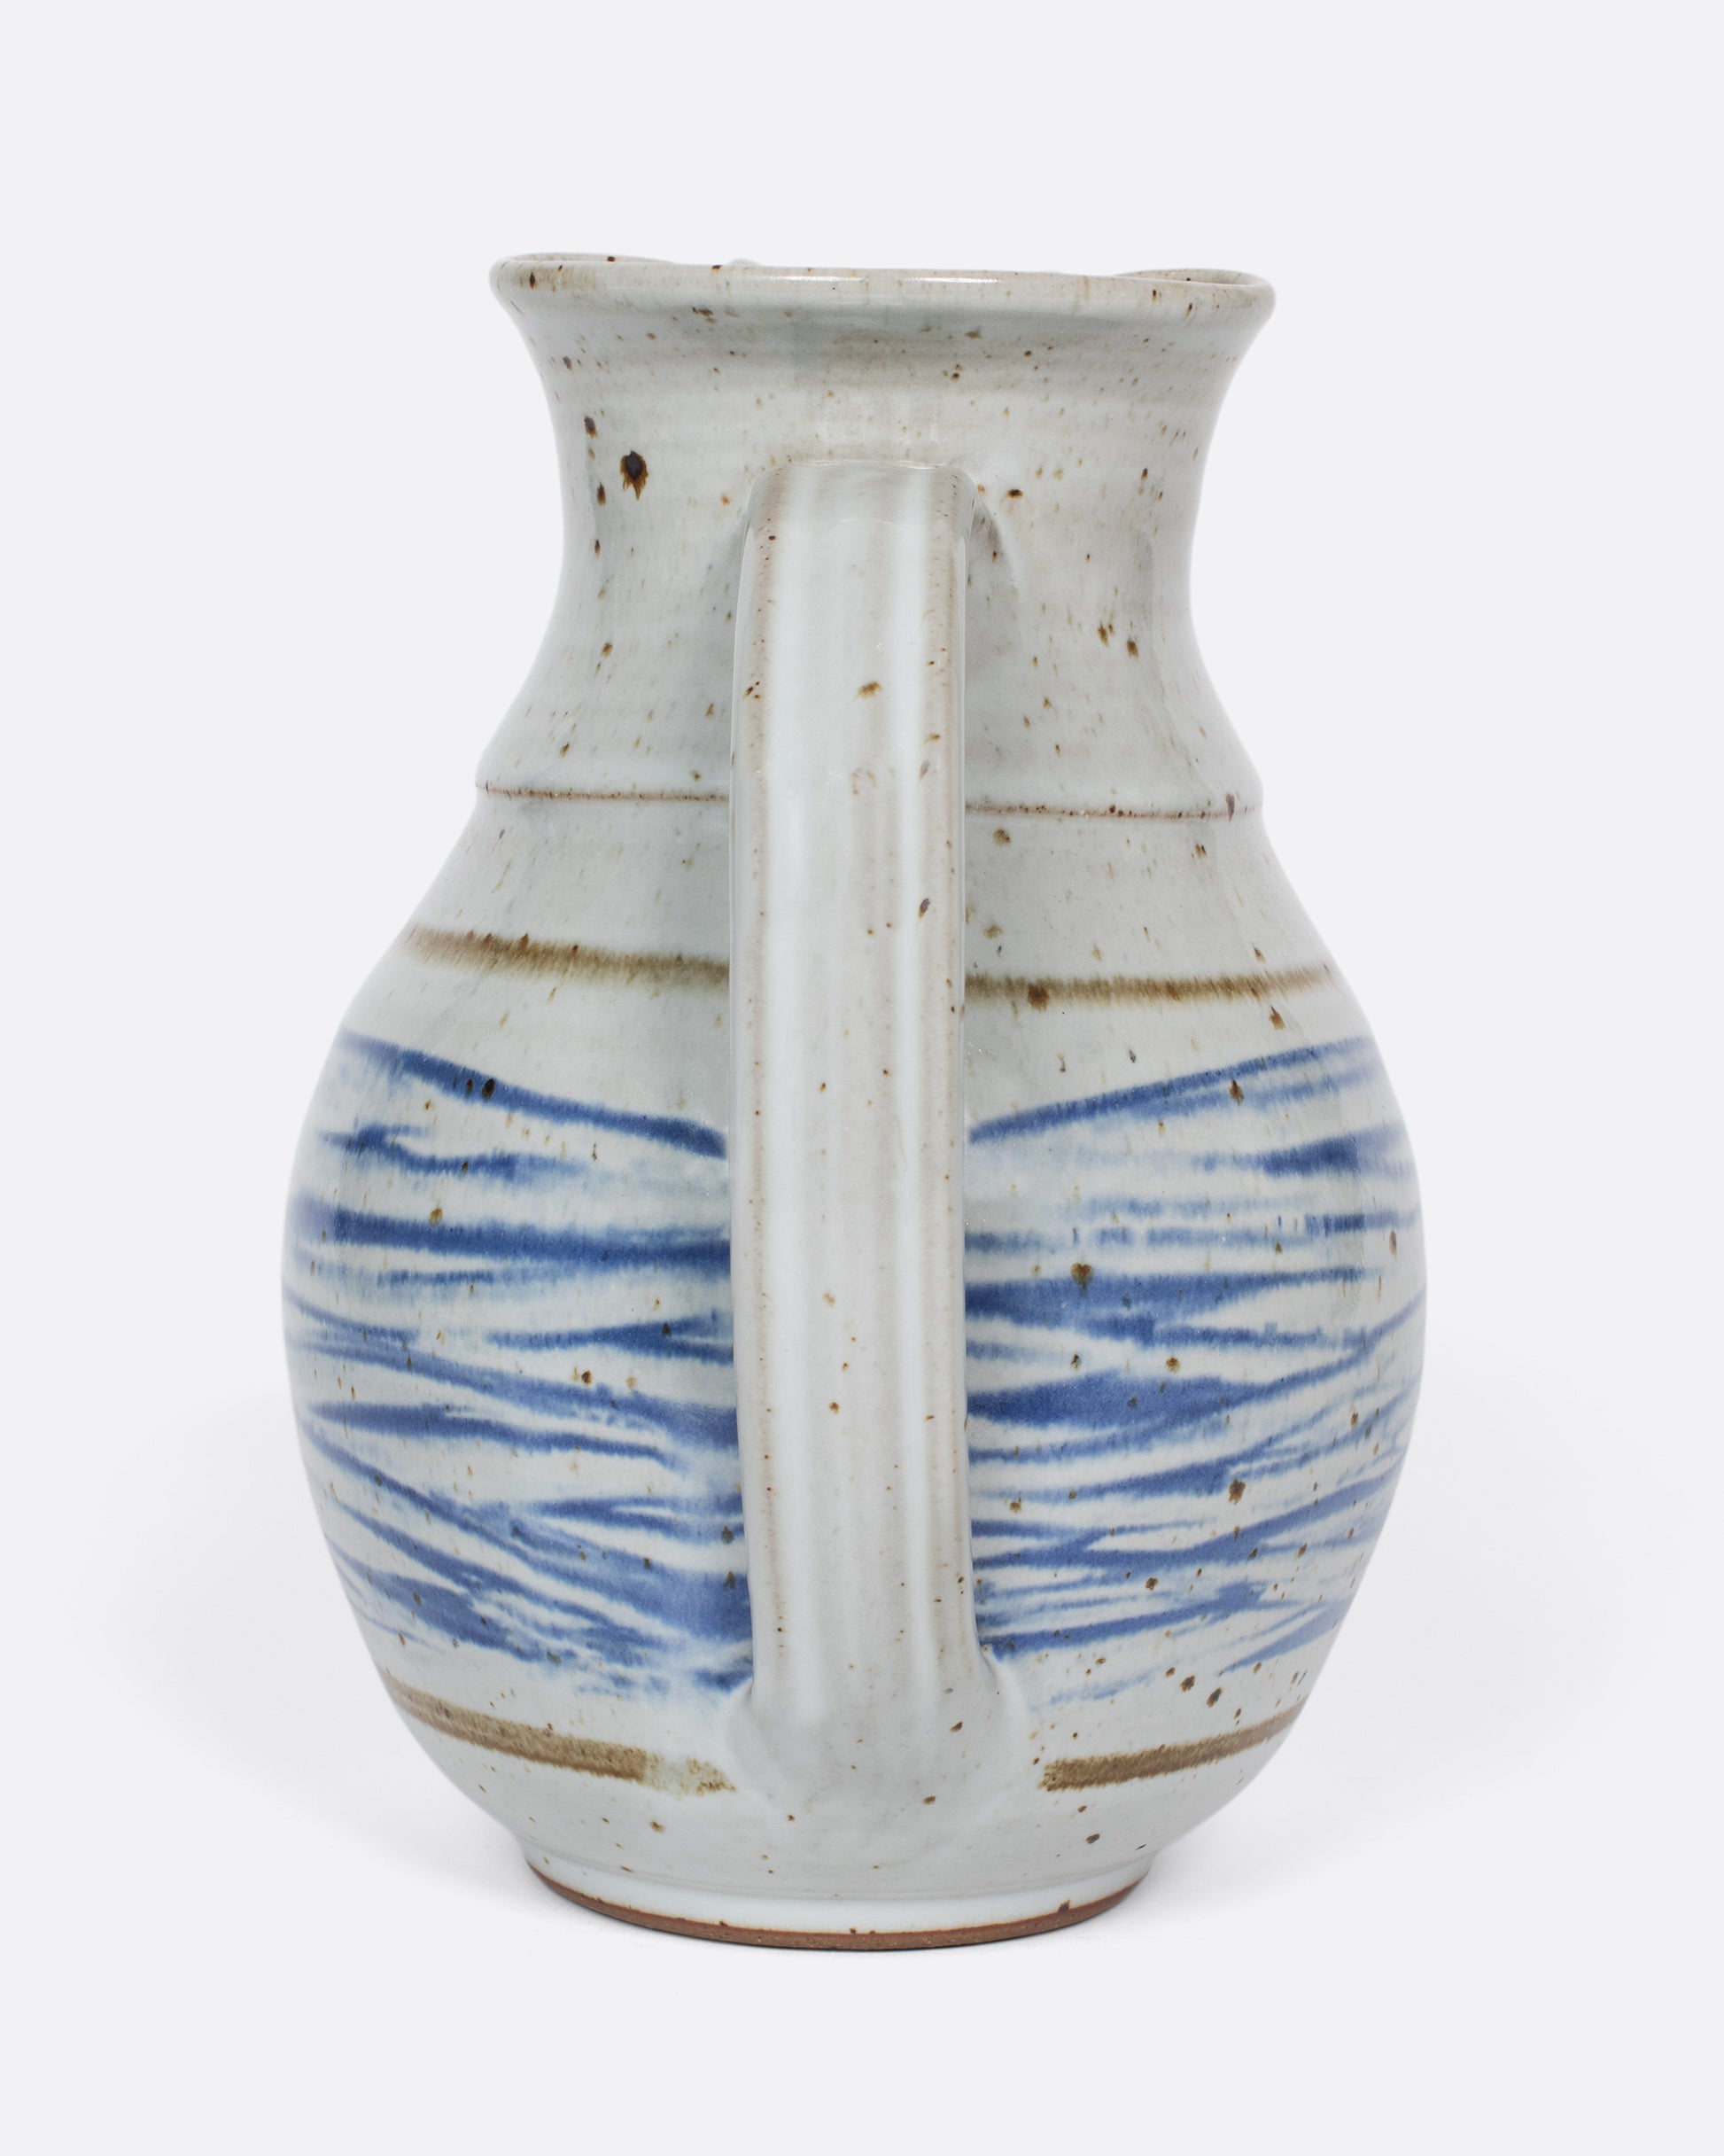 This vintage studio-made ceramic pitcher features a speckled white glaze and a blue water-like, hand-painted pattern.